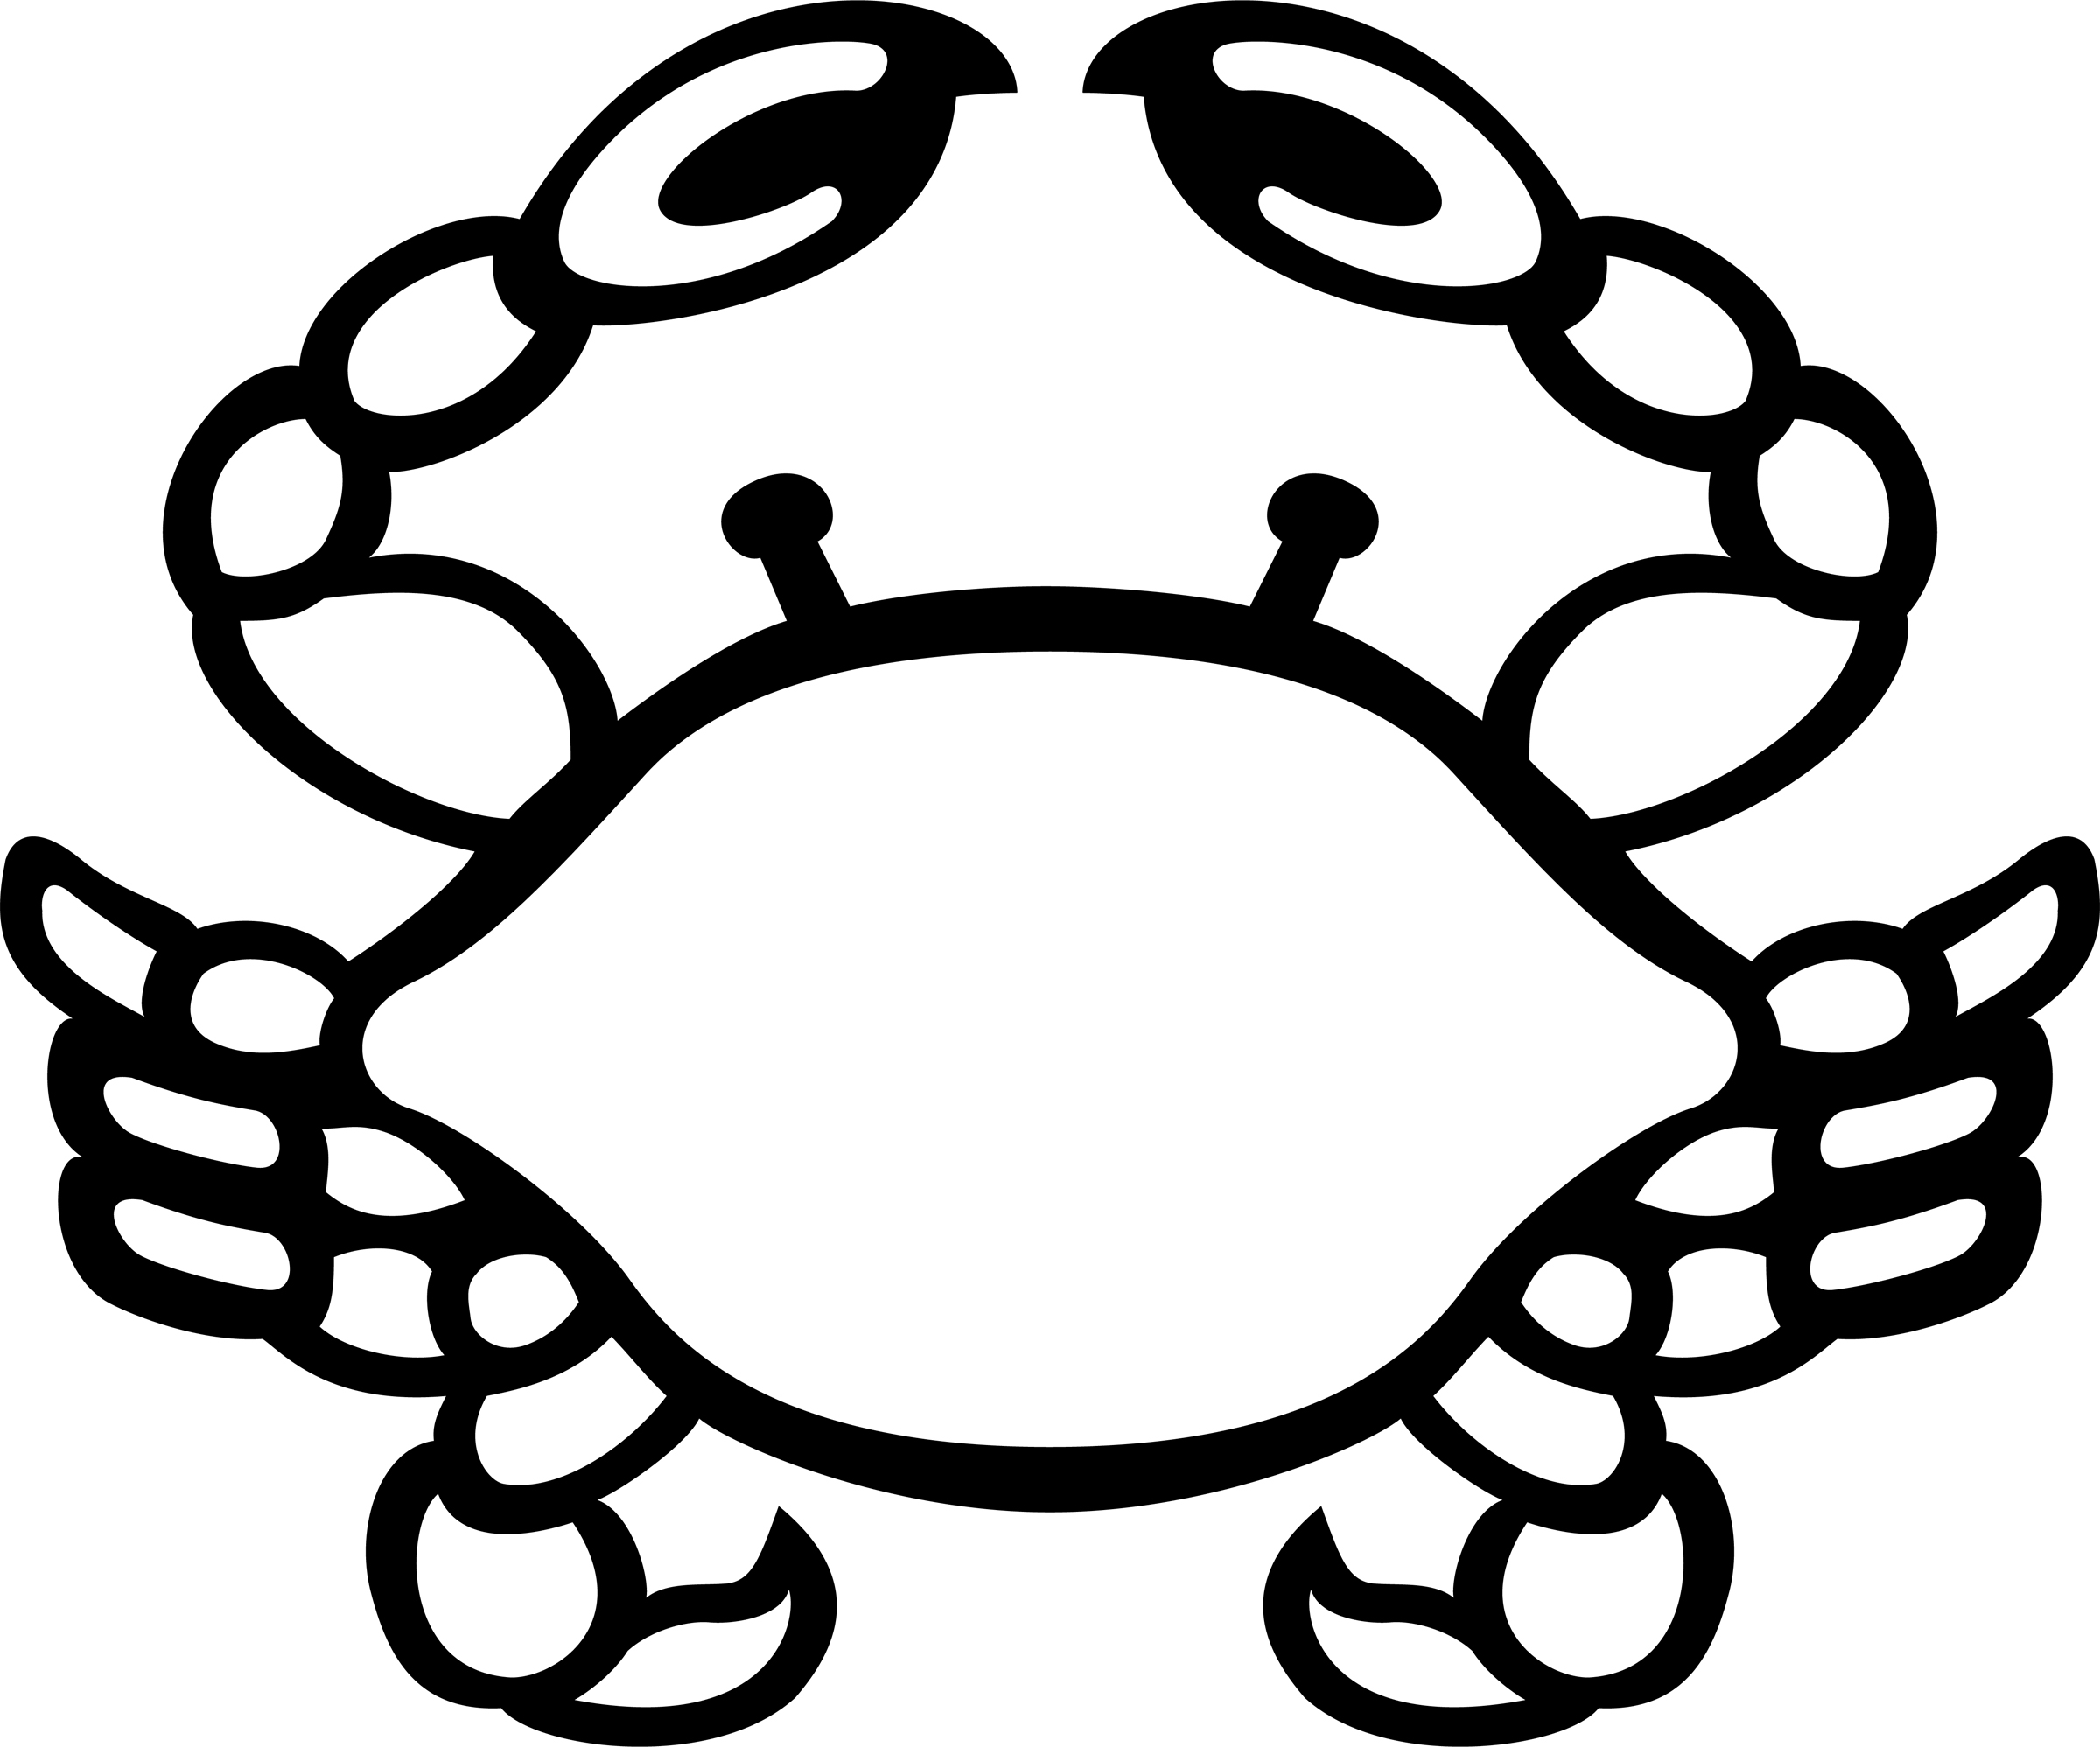 Blue Crab Clip Art From Votes - ClipArt Best - ClipArt Best